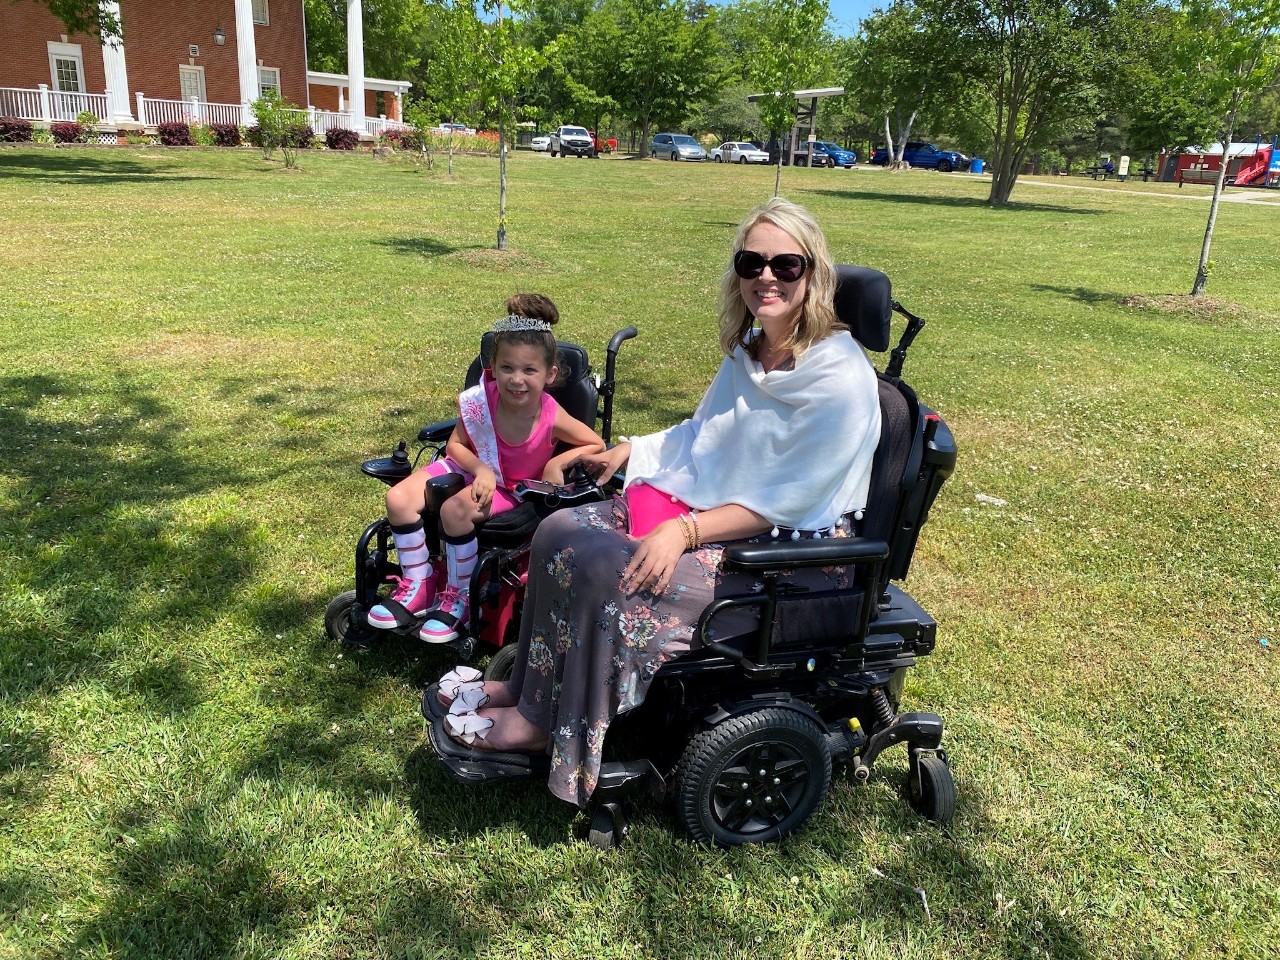 Anora is a young girl of maybe 4-6 years old seated in a wheelchair with a tiara wearing pink and smiling for the photo next to Bliss outdoors; both are in power wheelchairs